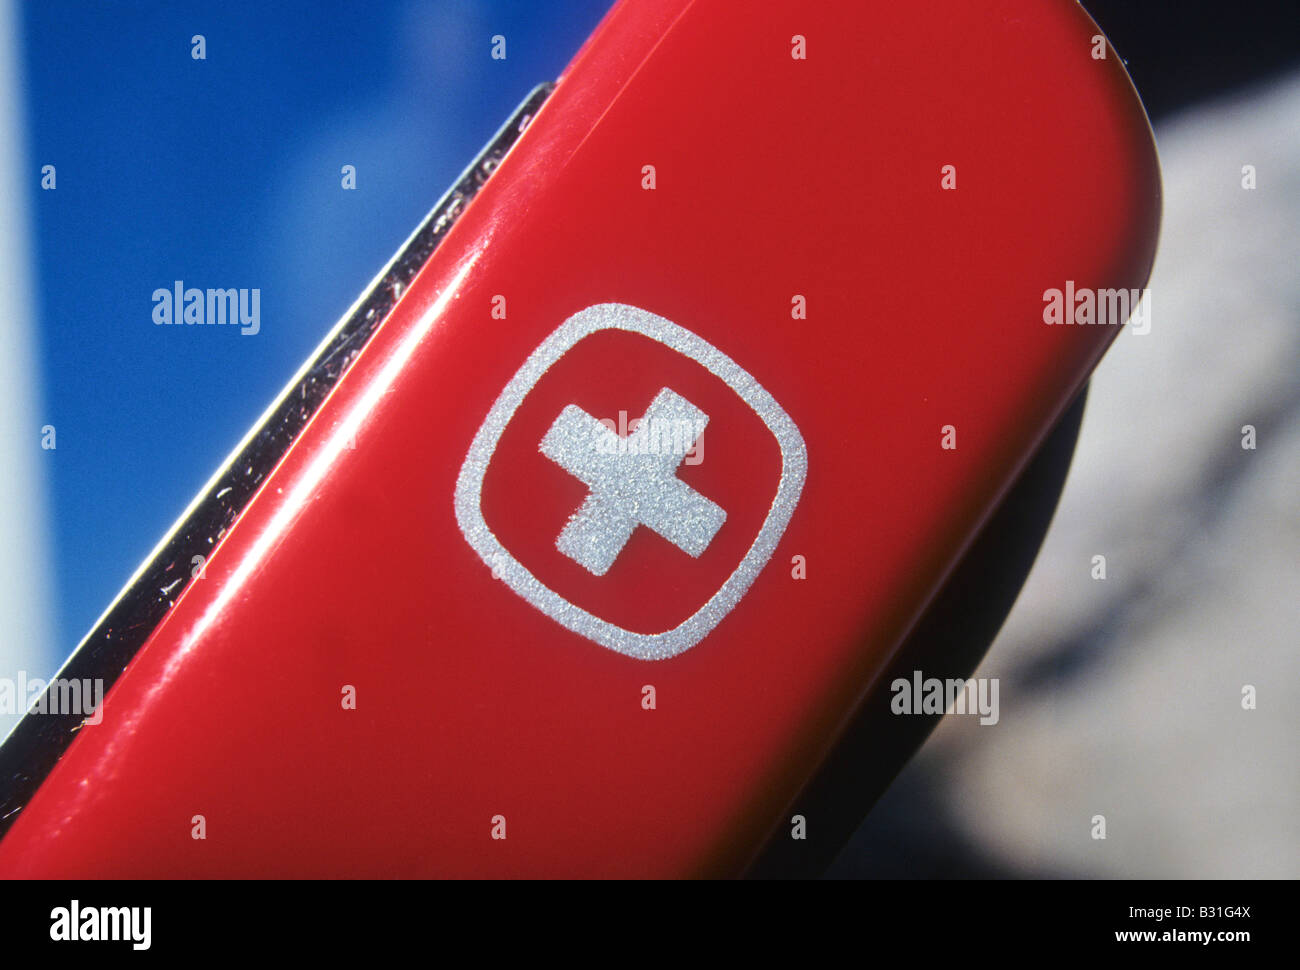 Victorinox logo on side of bright red Swiss army knife. Stock Photo